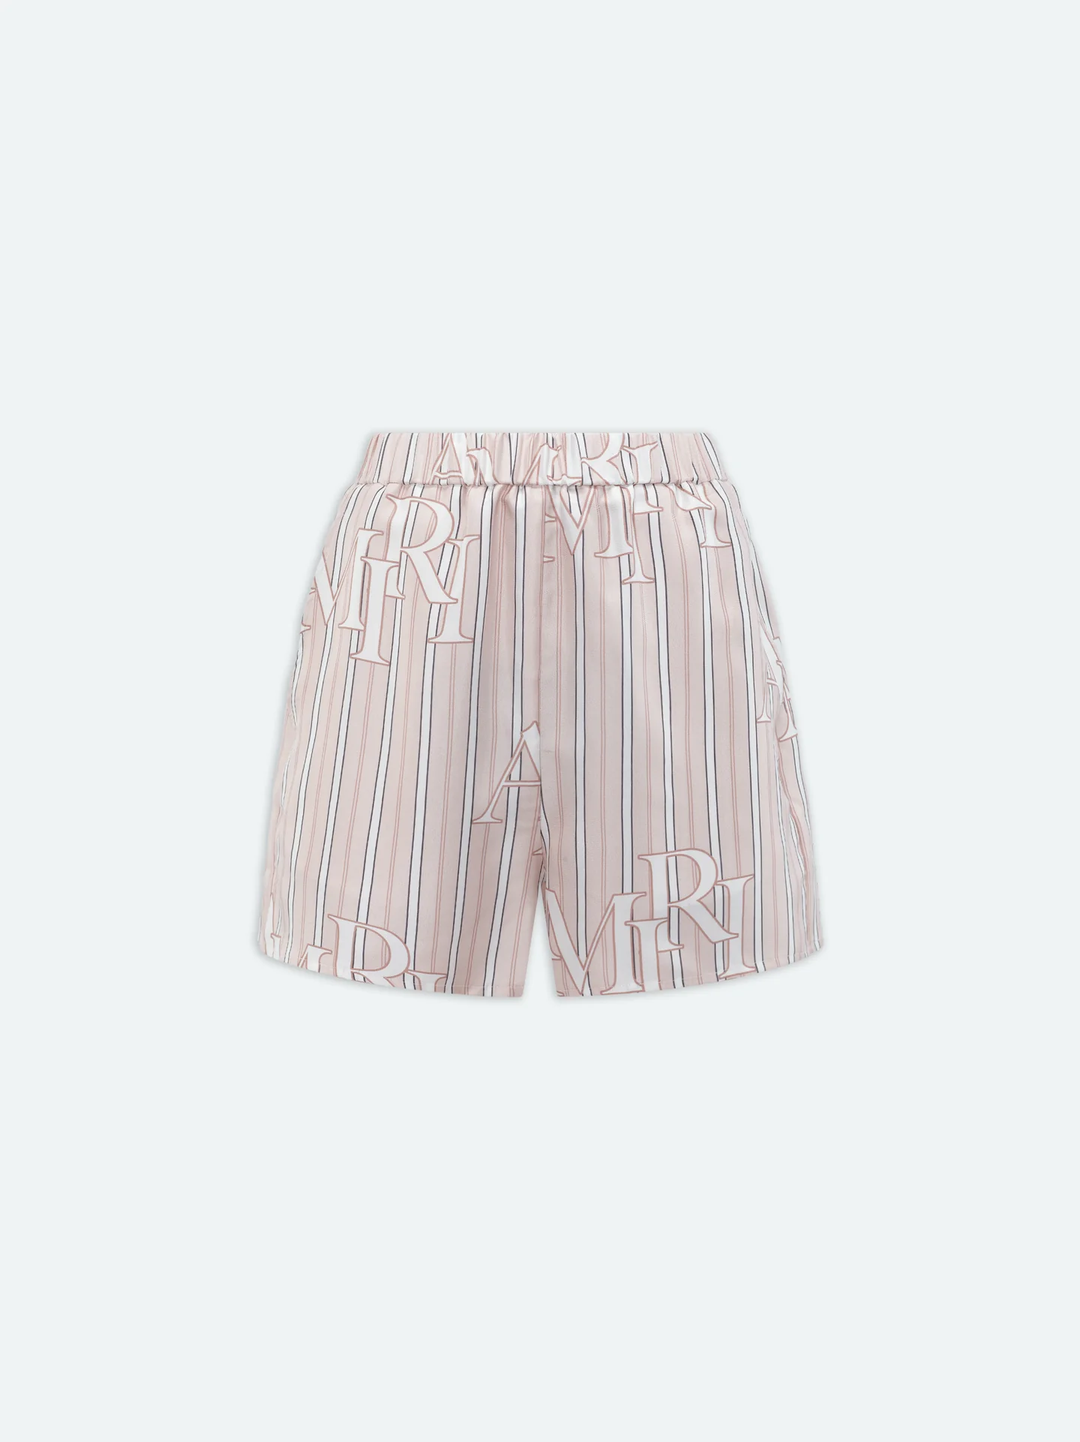 Staggered Stripe Shorts